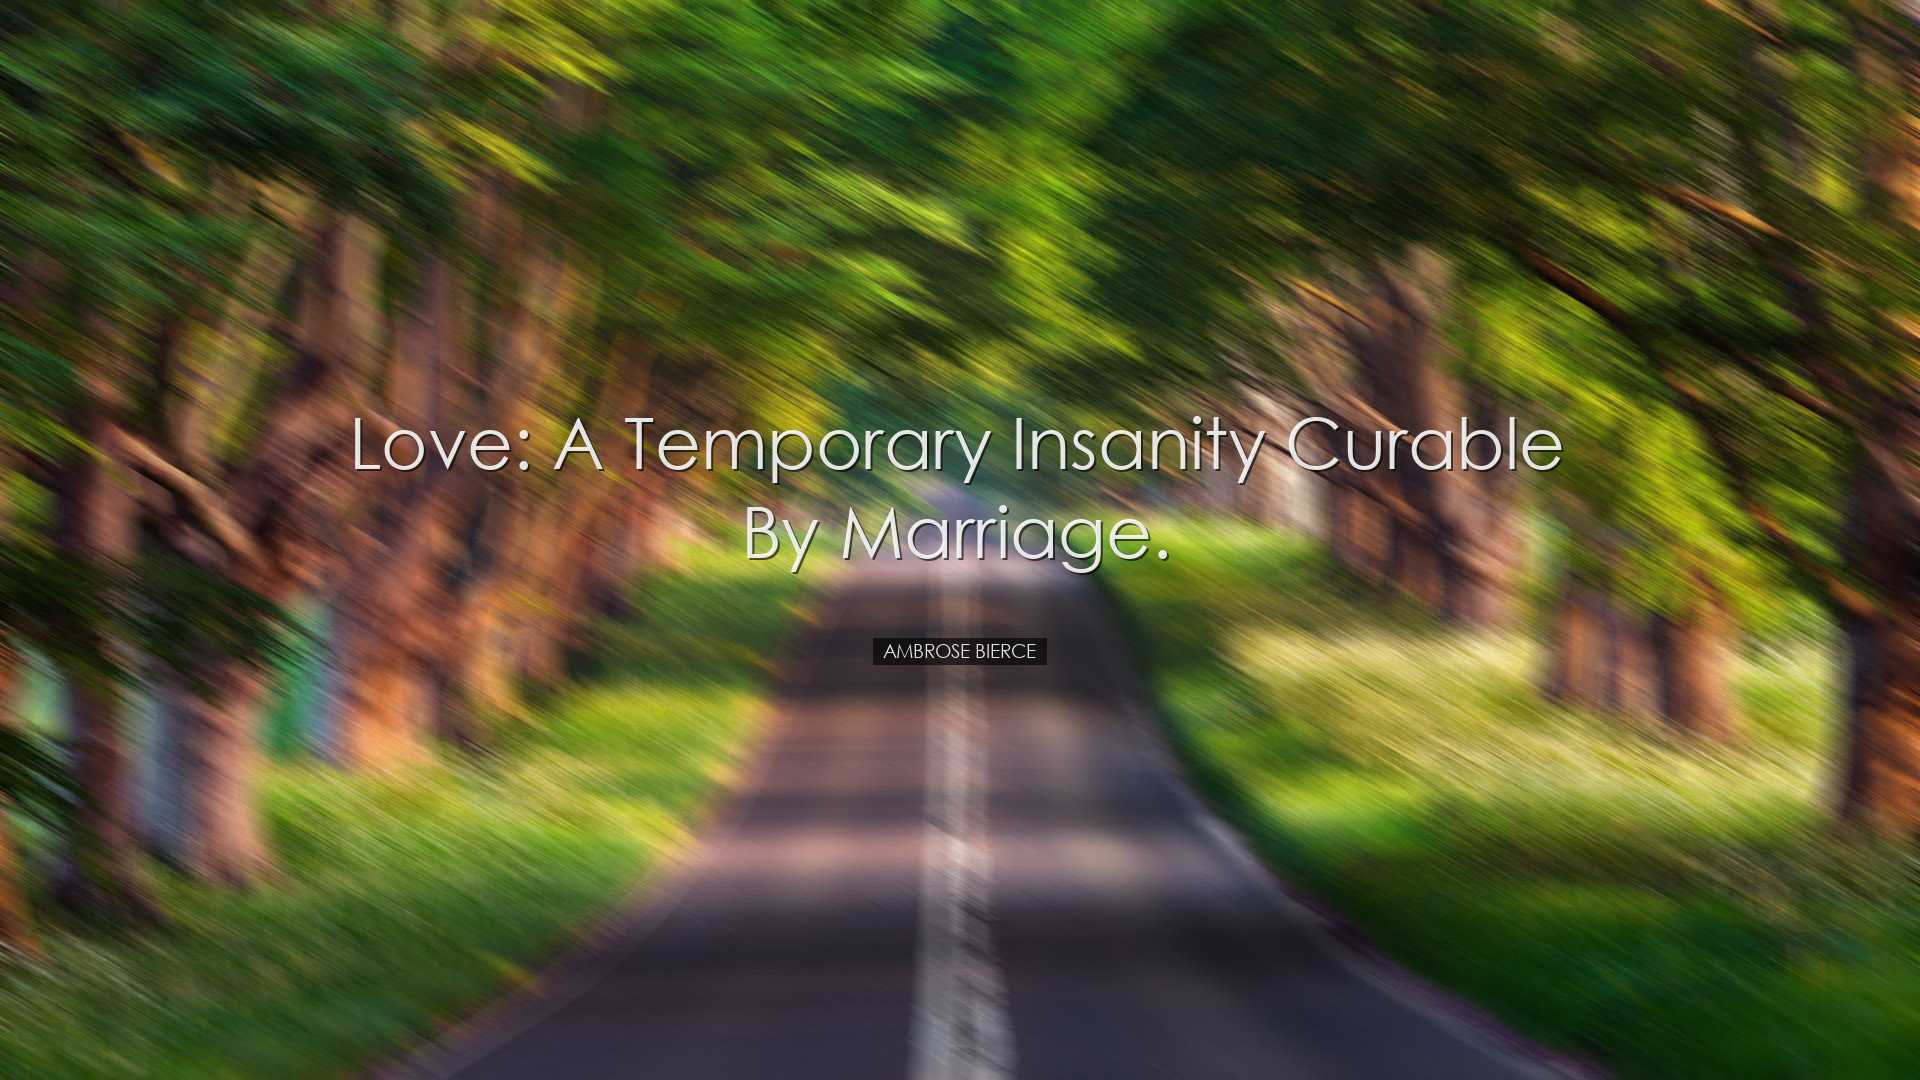 Love: A temporary insanity curable by marriage. - Ambrose Bierce